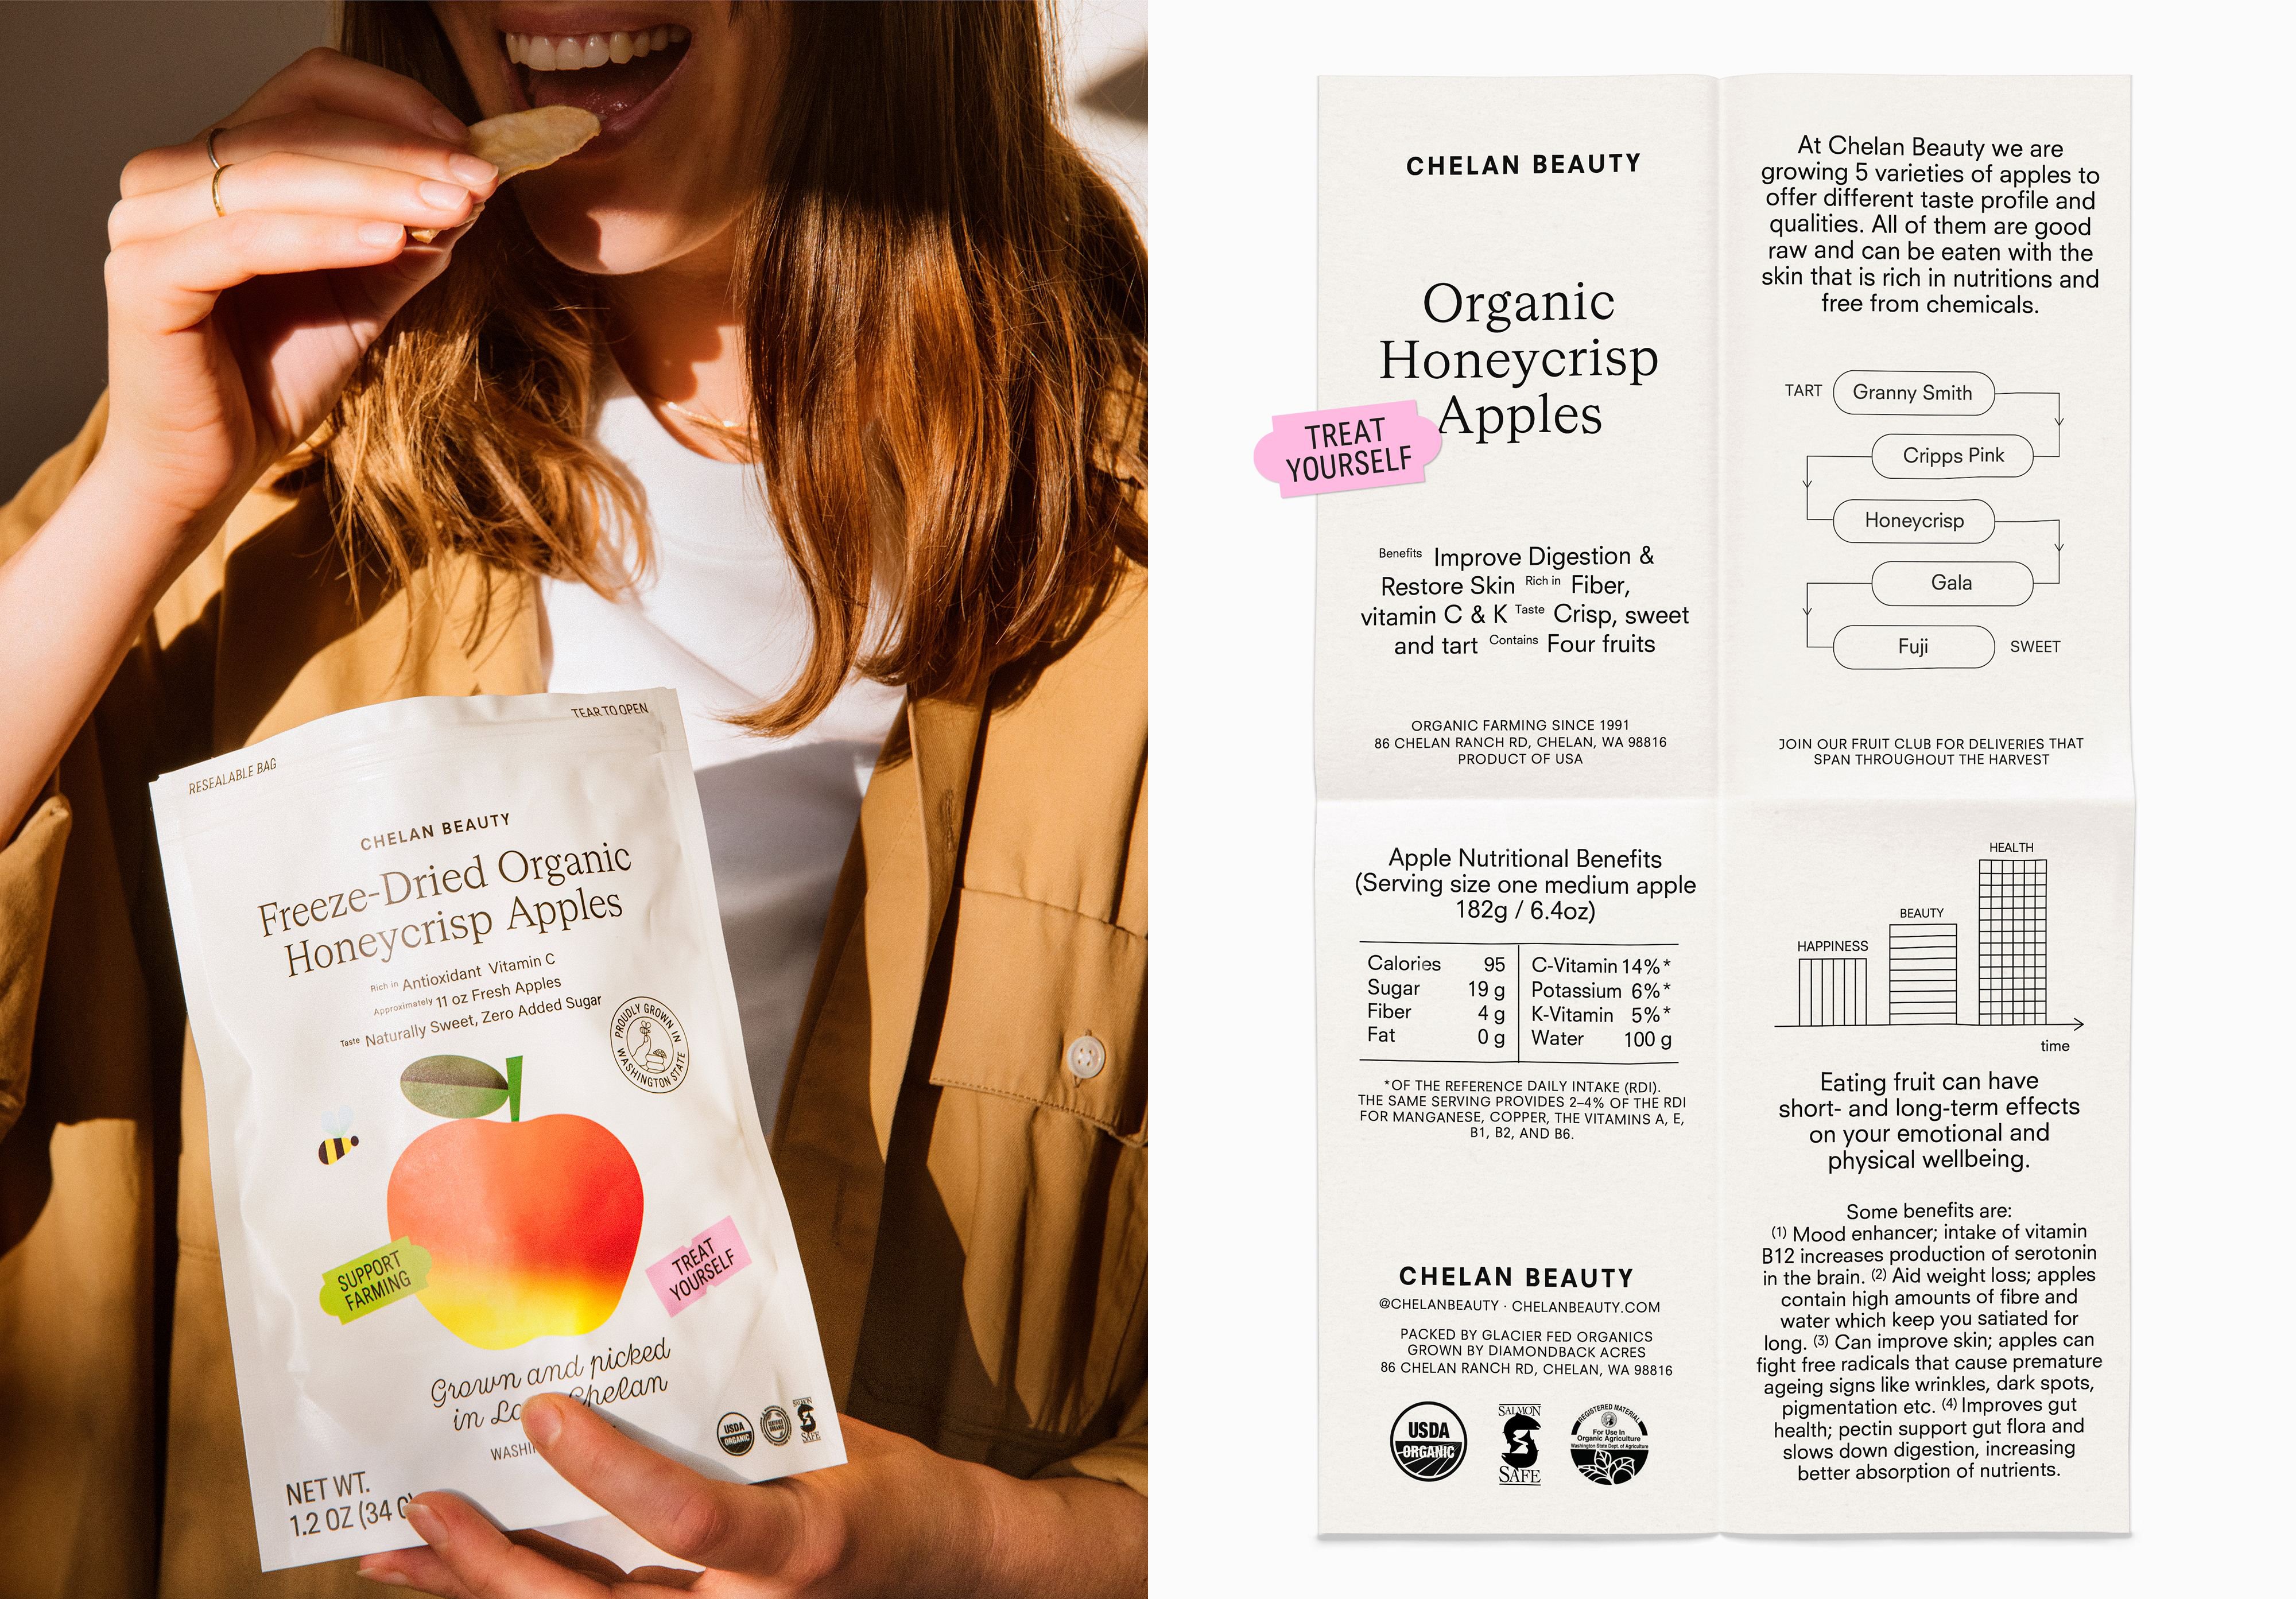 New brand identity and packaging design by Olssøn Barbieri for freeze dried organic fruit company Chelan Beauty. Reviewed by Emily Gosling.